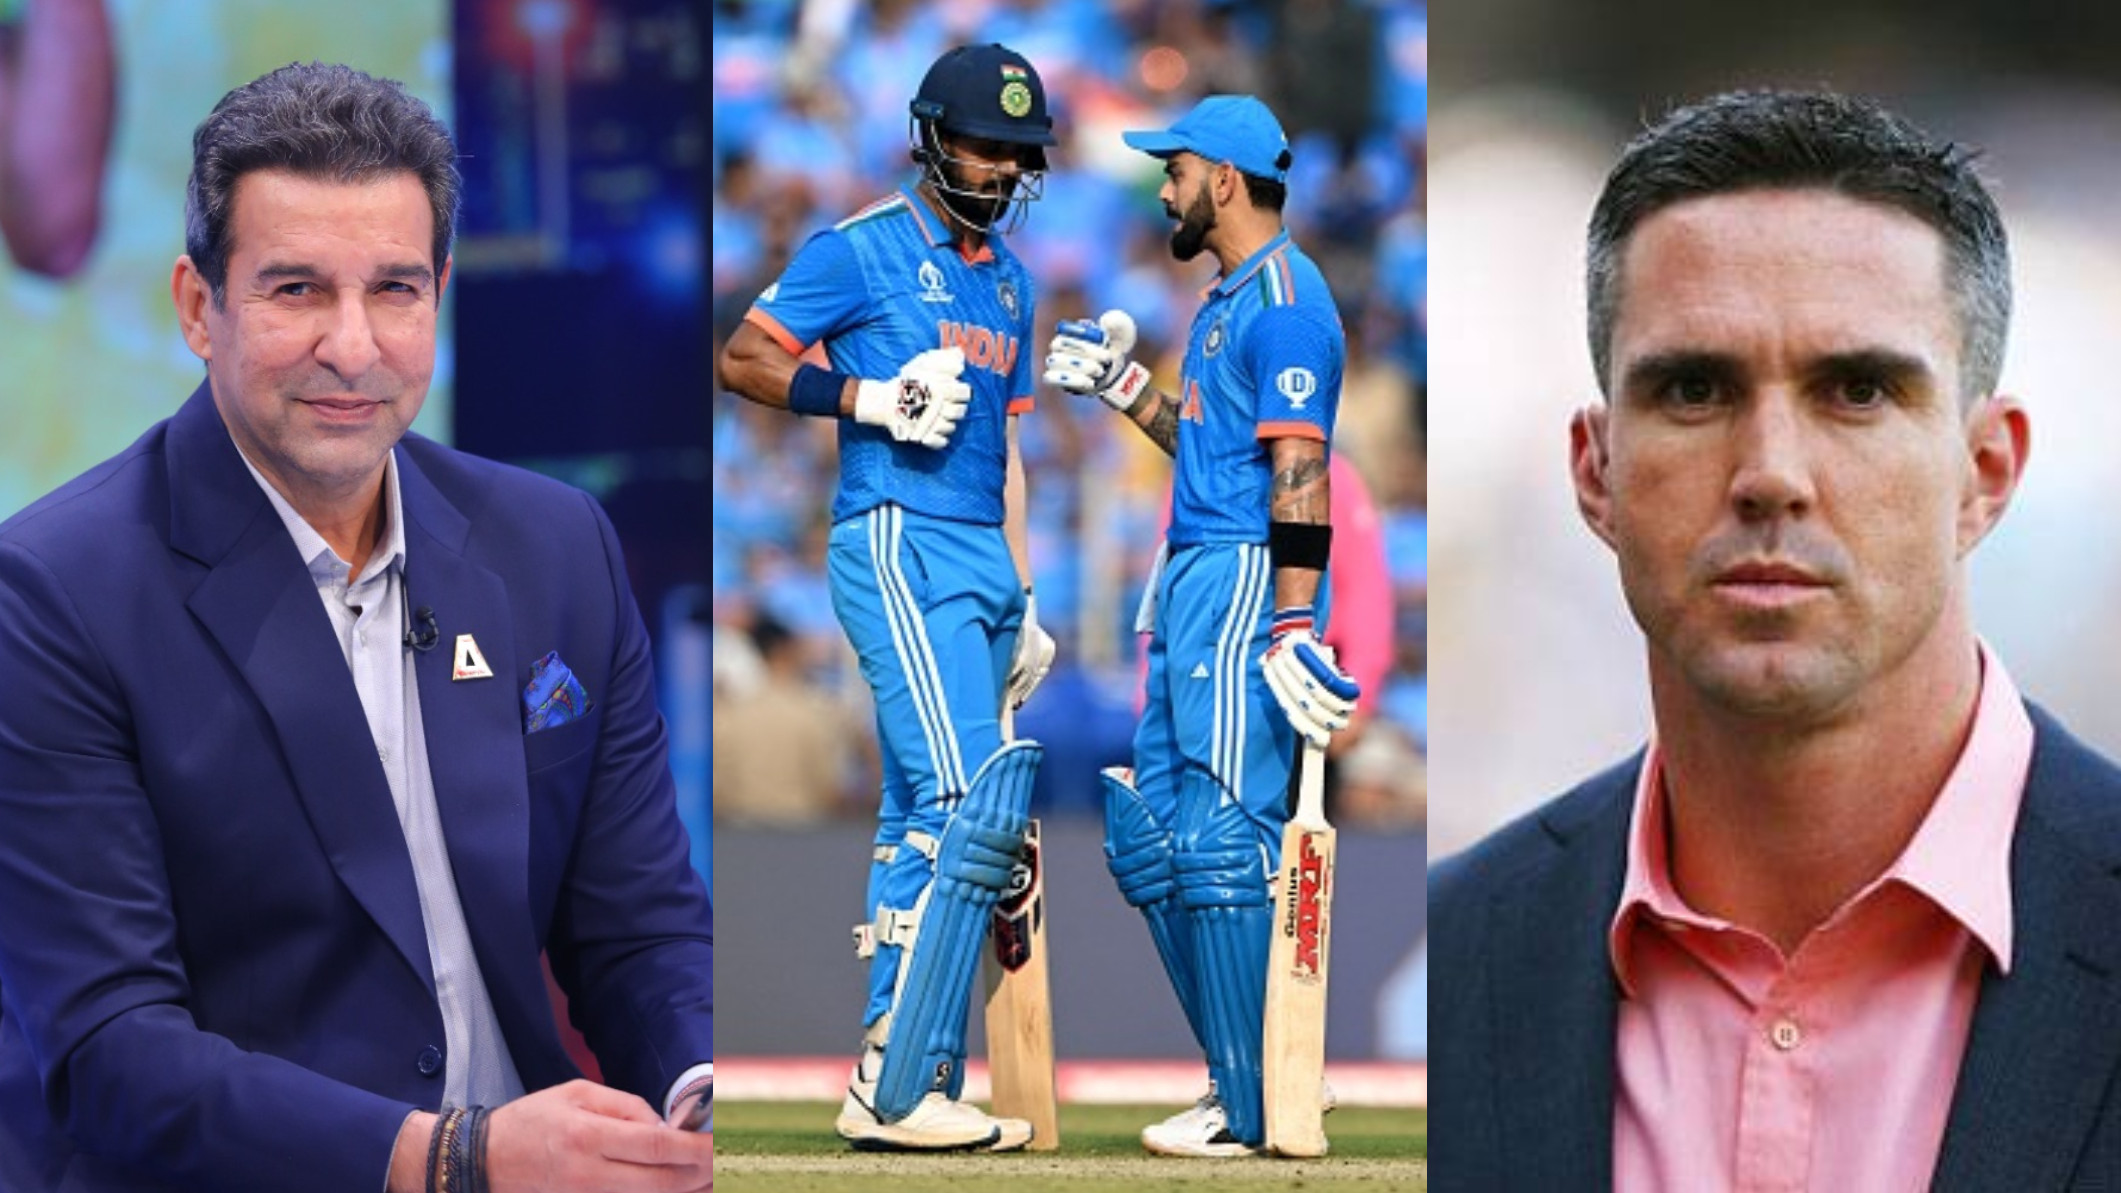 CWC 2023: Cricket fraternity reacts as Virat Kohli, KL Rahul fifties push India to 240 in World Cup final